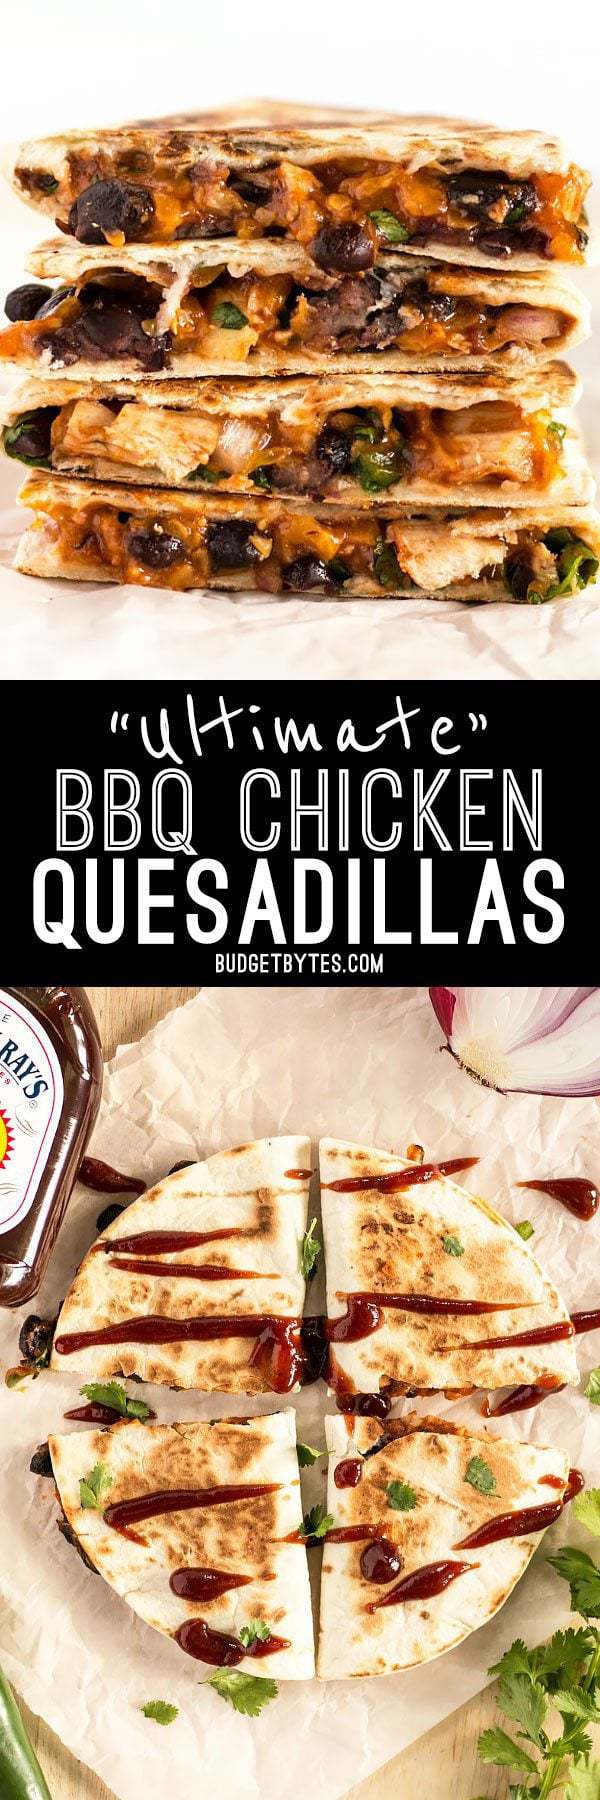 These Ultimate BBQ Chicken Quesadillas are packed with colorful ingredients and deliciously tangy Sweet Baby Ray's BBQ sauce! #ad BudgetBytes.com